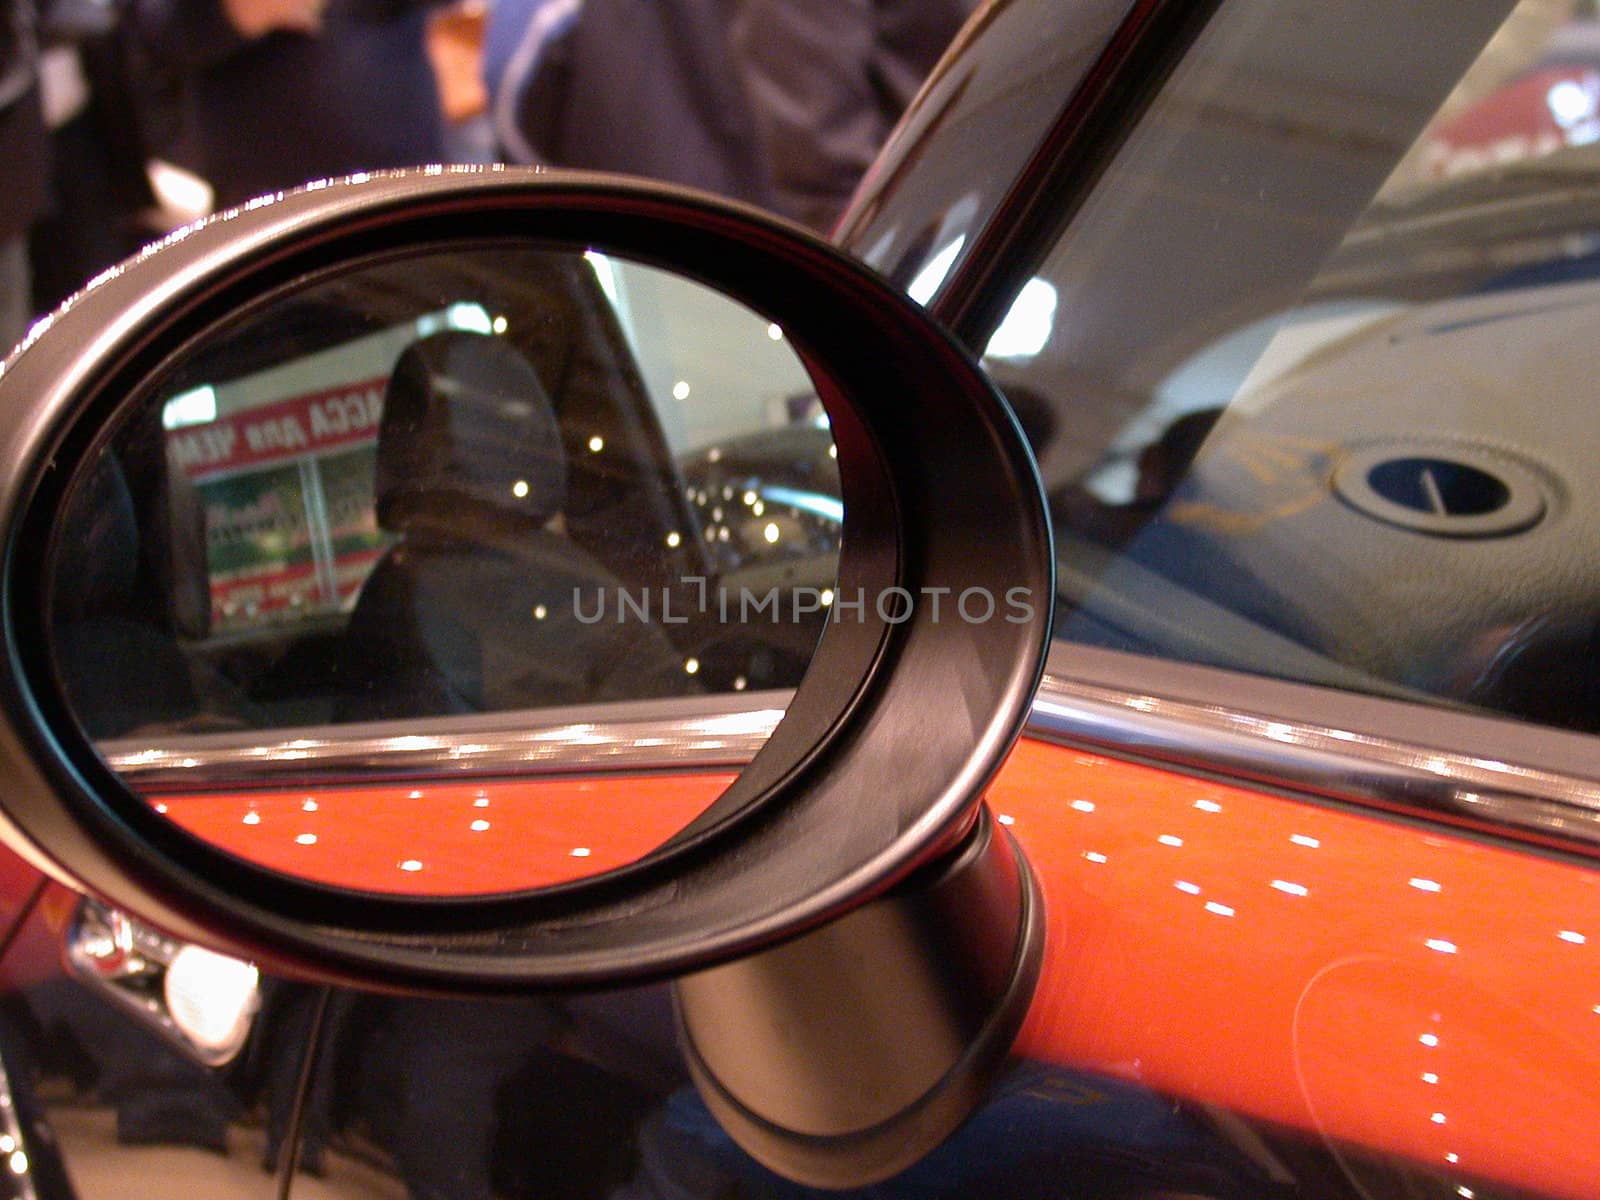 The auto detailed. The mirror of the view aft.